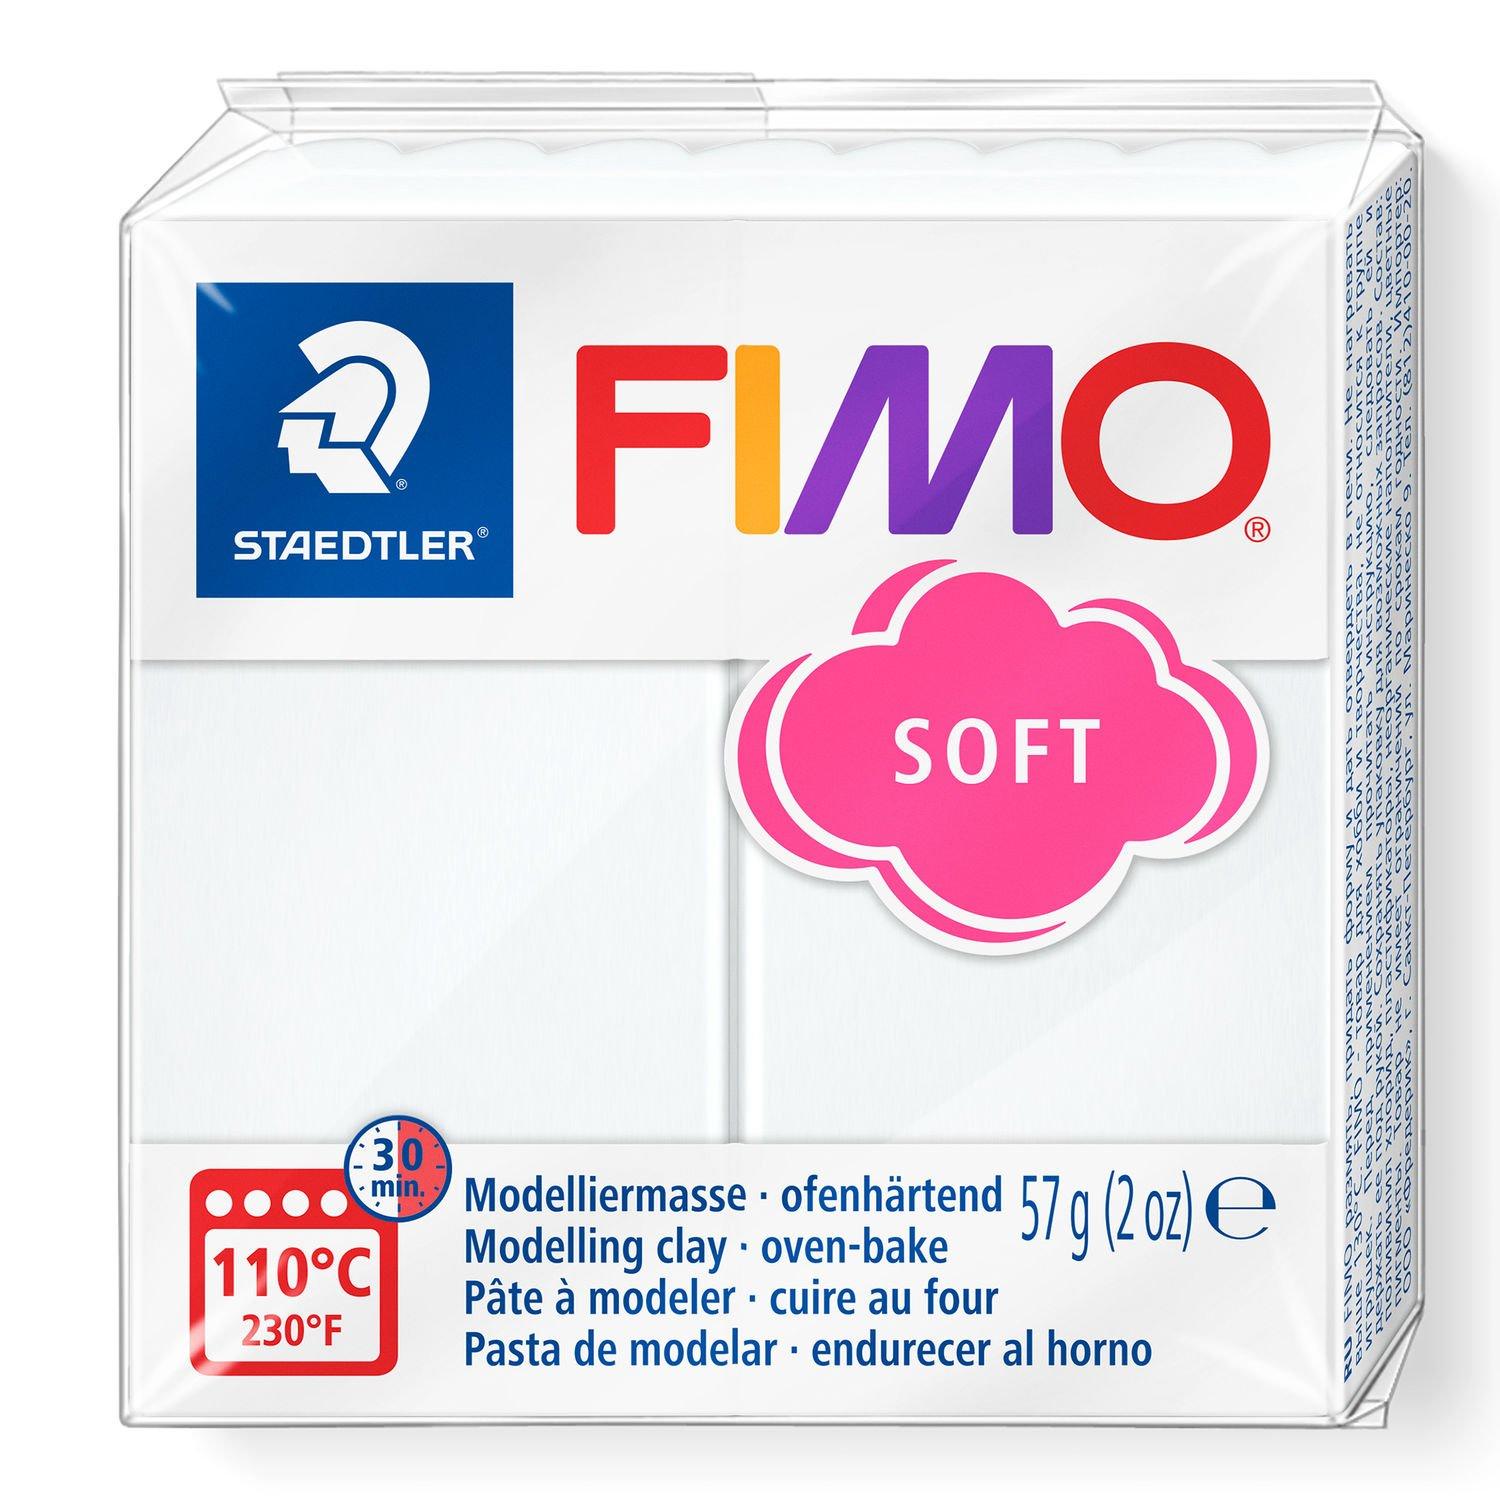 Packet of Fino Soft white modelling clay.